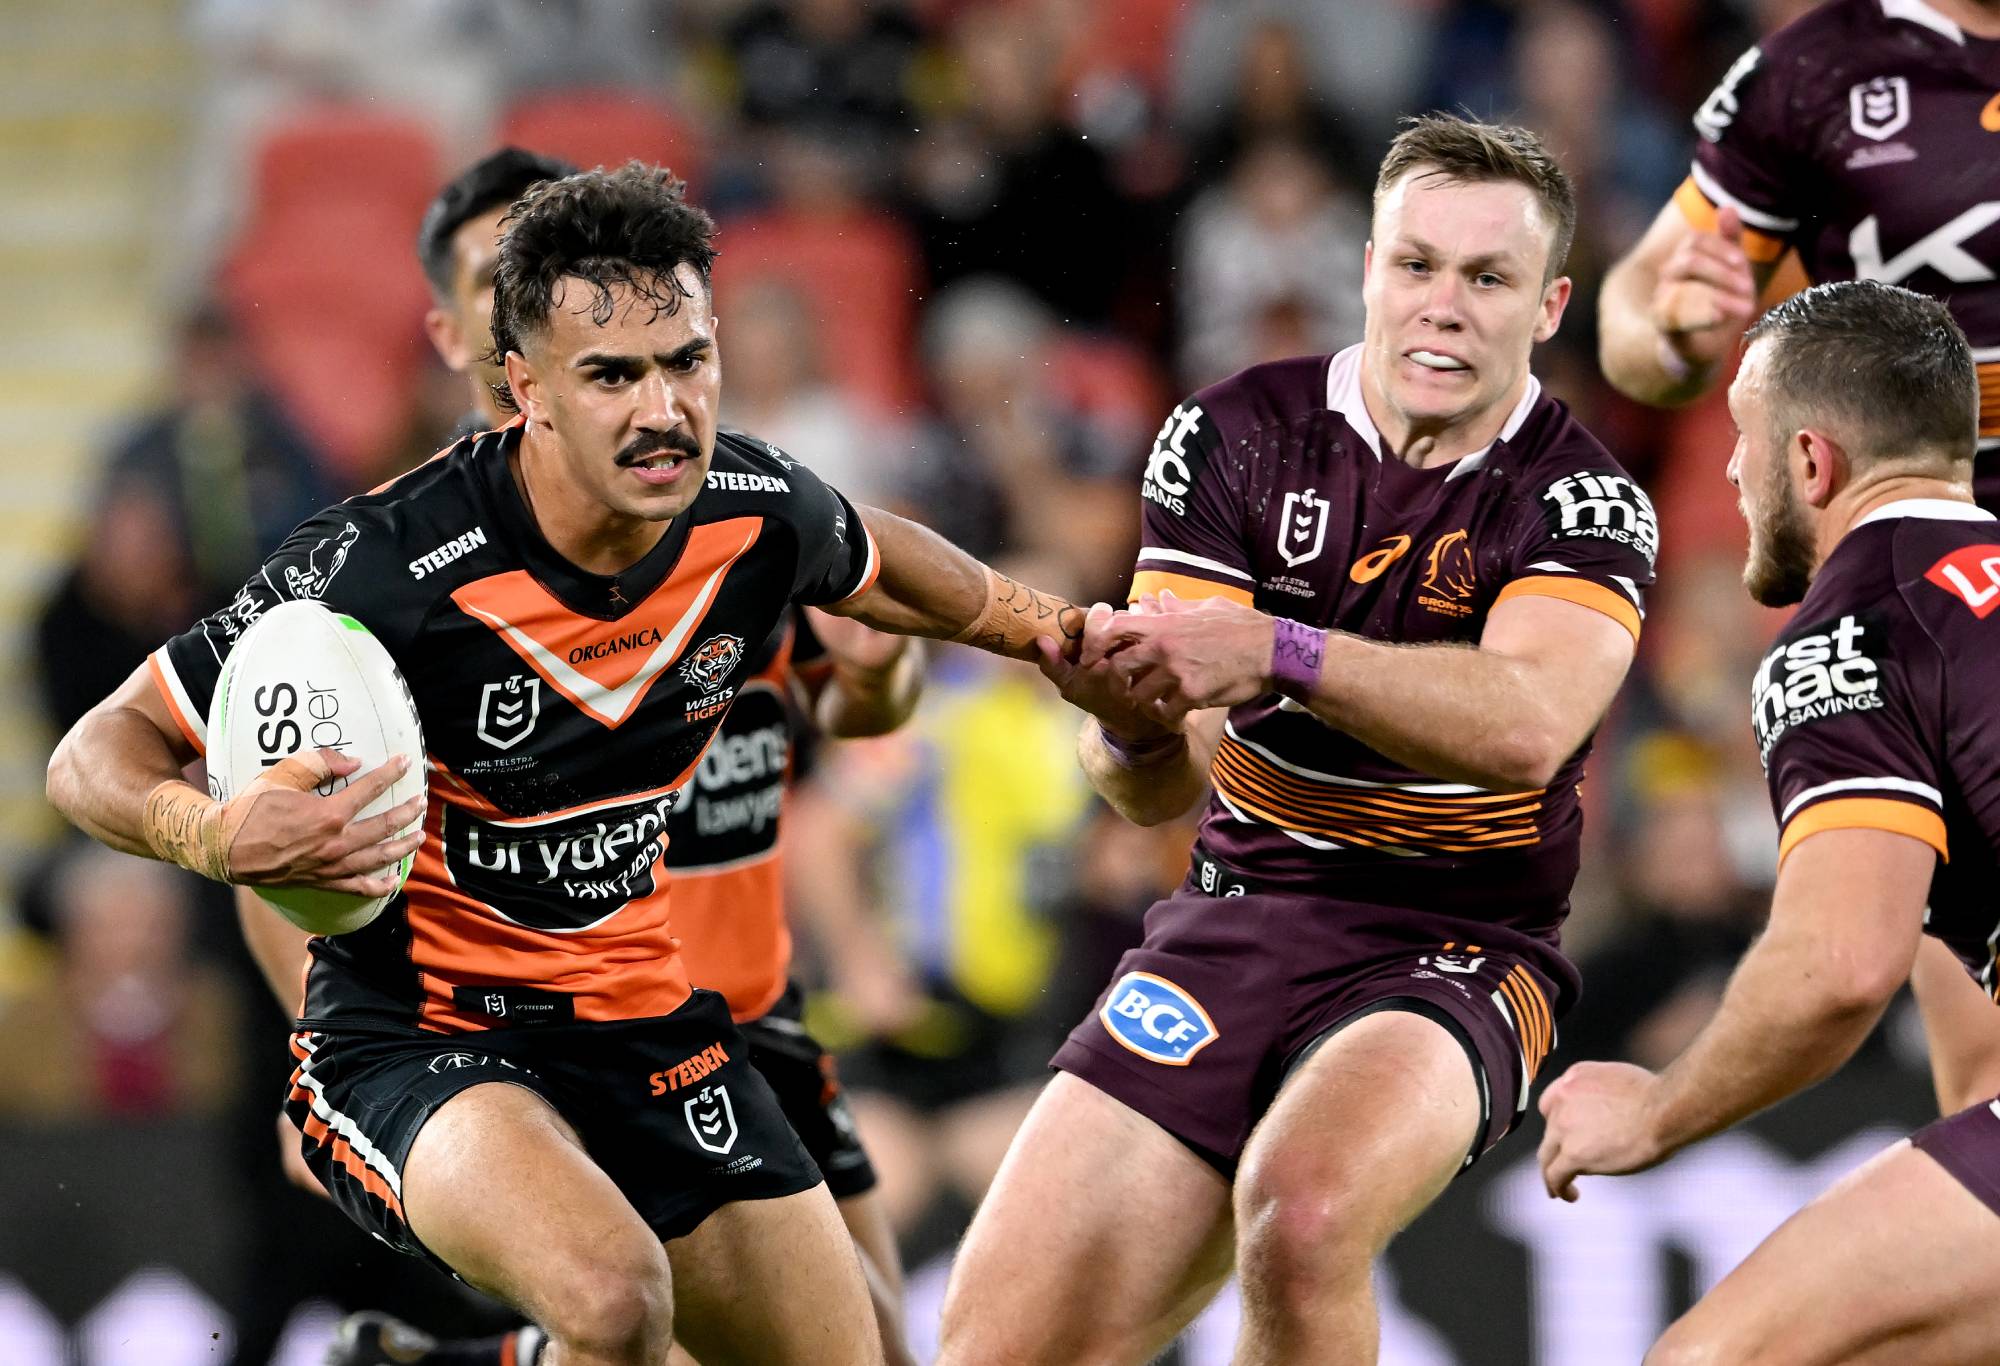 BRISBANE, AUSTRALIA - JULY 30: Daine Laurie of the Tigers attempts to break away from the defence during the round 20 NRL match between the Brisbane Broncos and the Wests Tigers at Suncorp Stadium, on July 30, 2022, in Brisbane, Australia. (Photo by Bradley Kanaris/Getty Images)